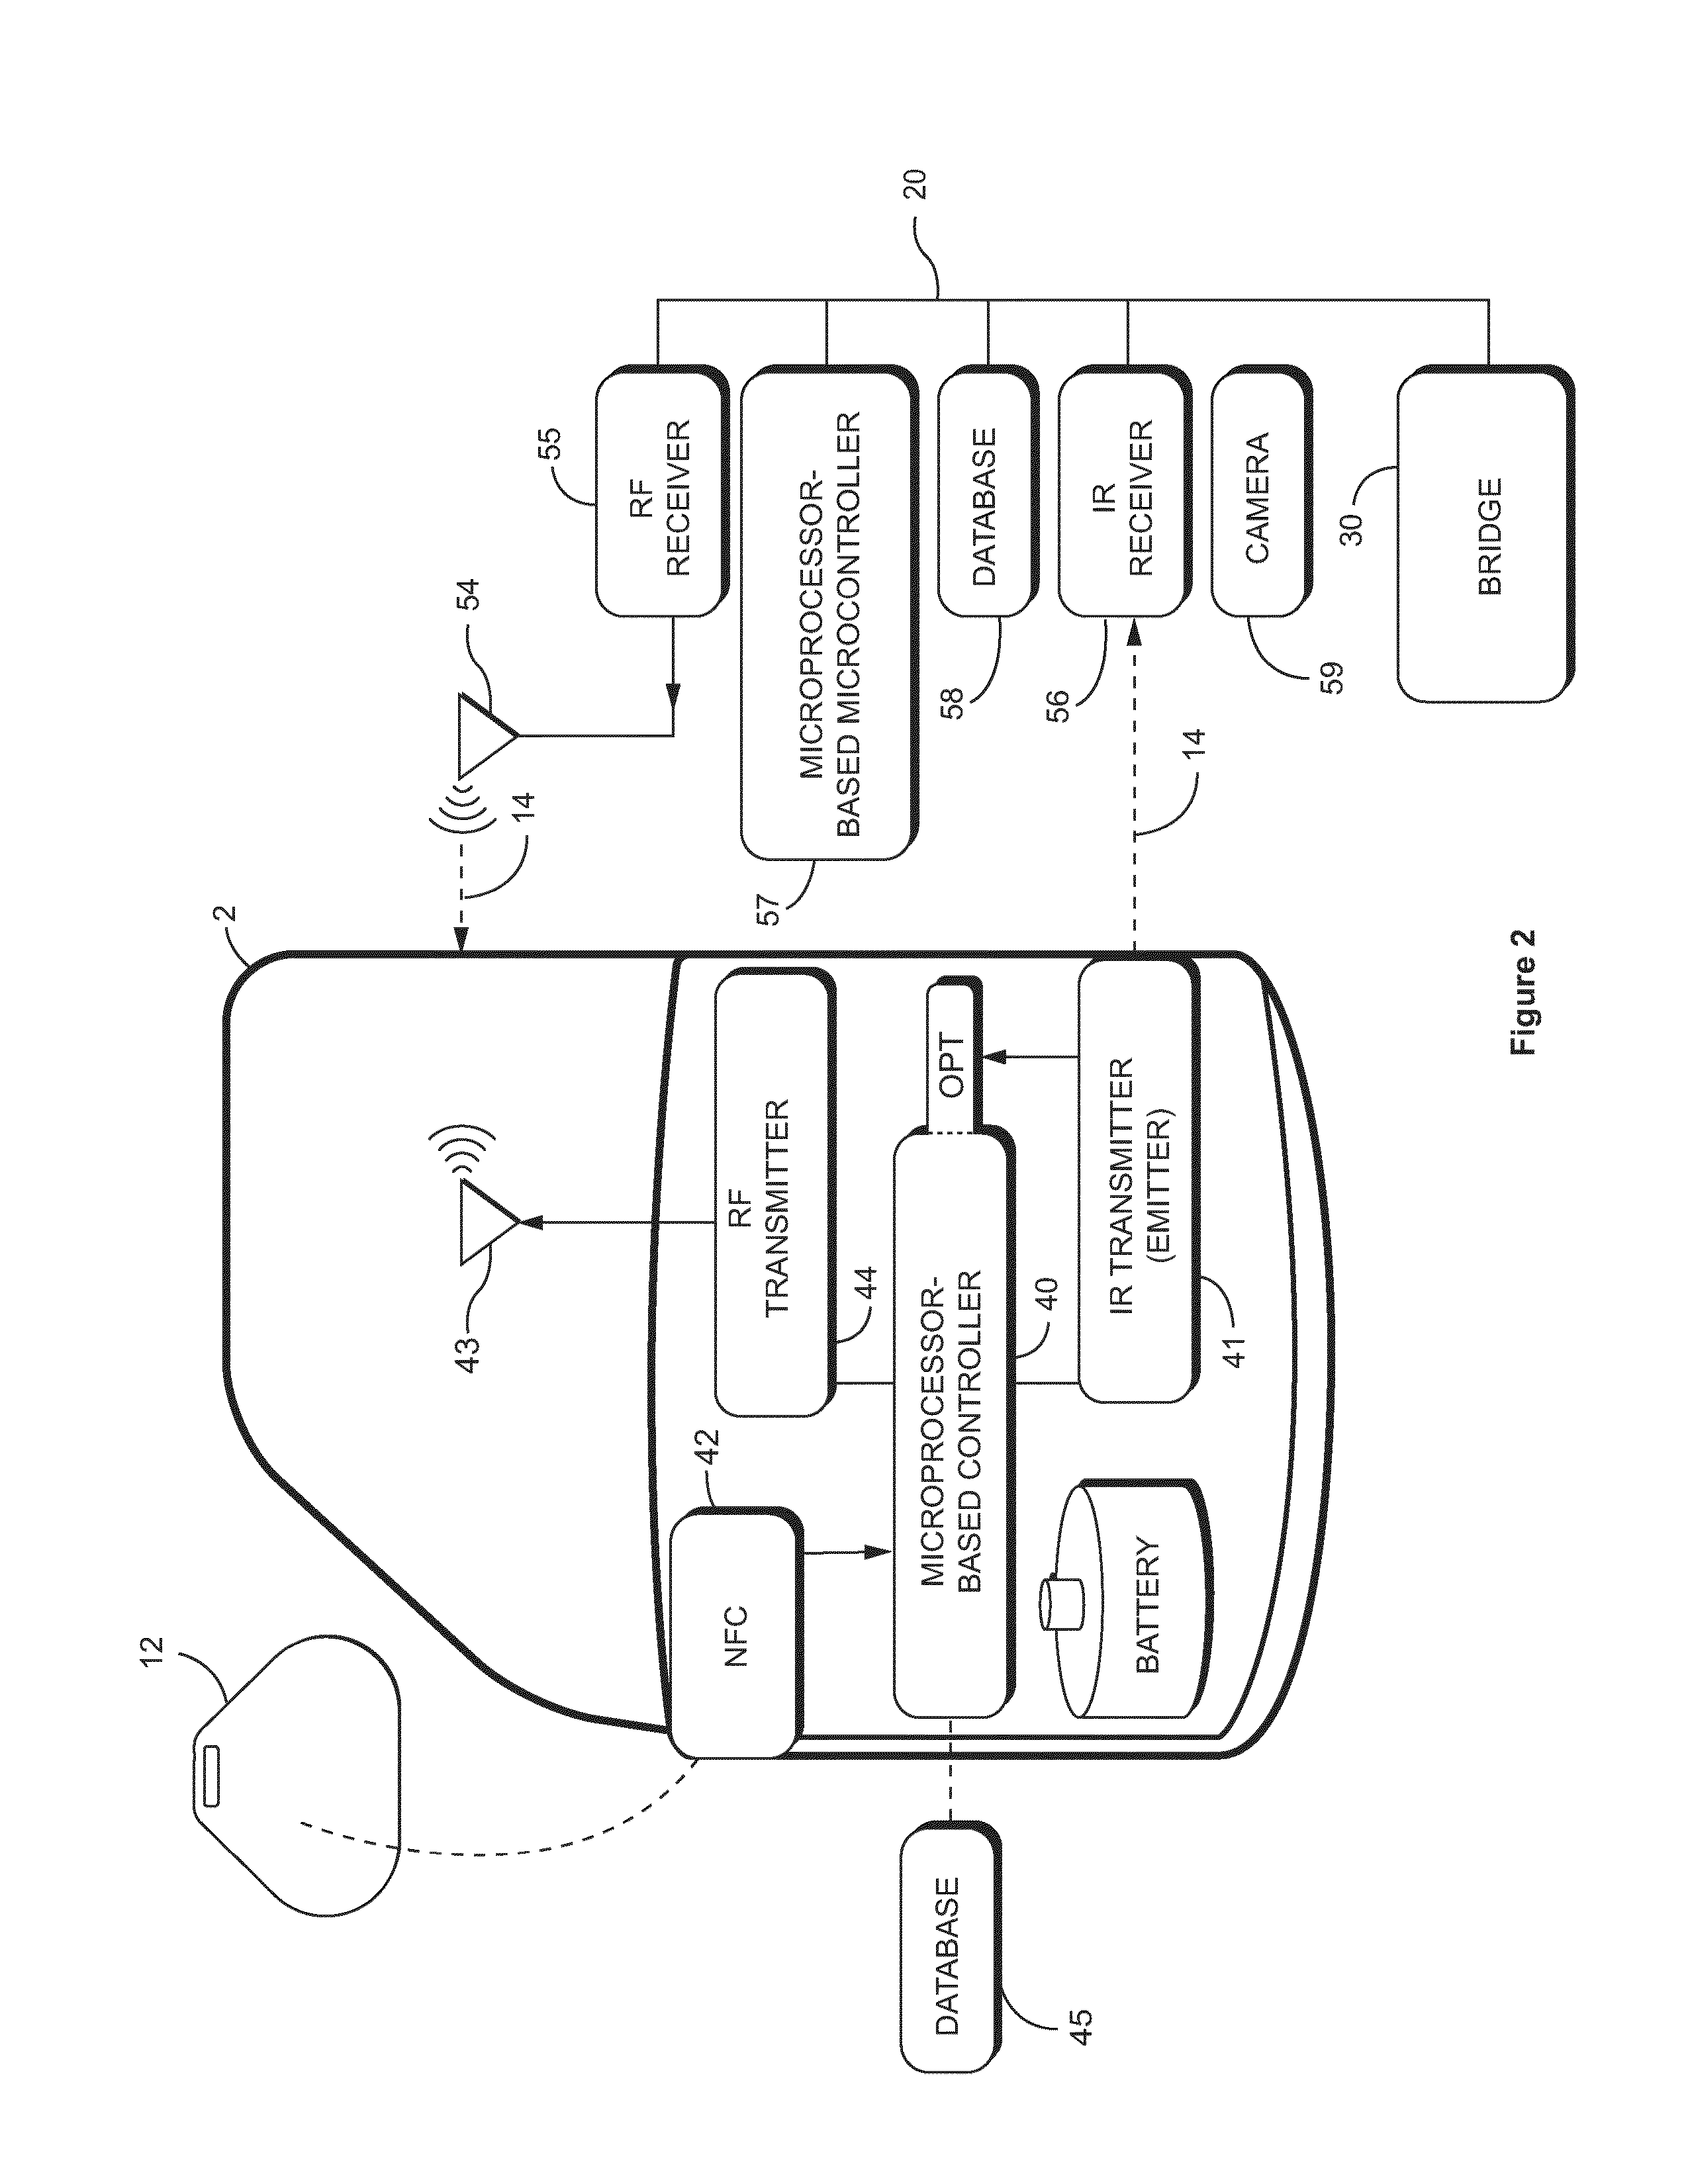 Systems and methods for effecting good hygiene practices